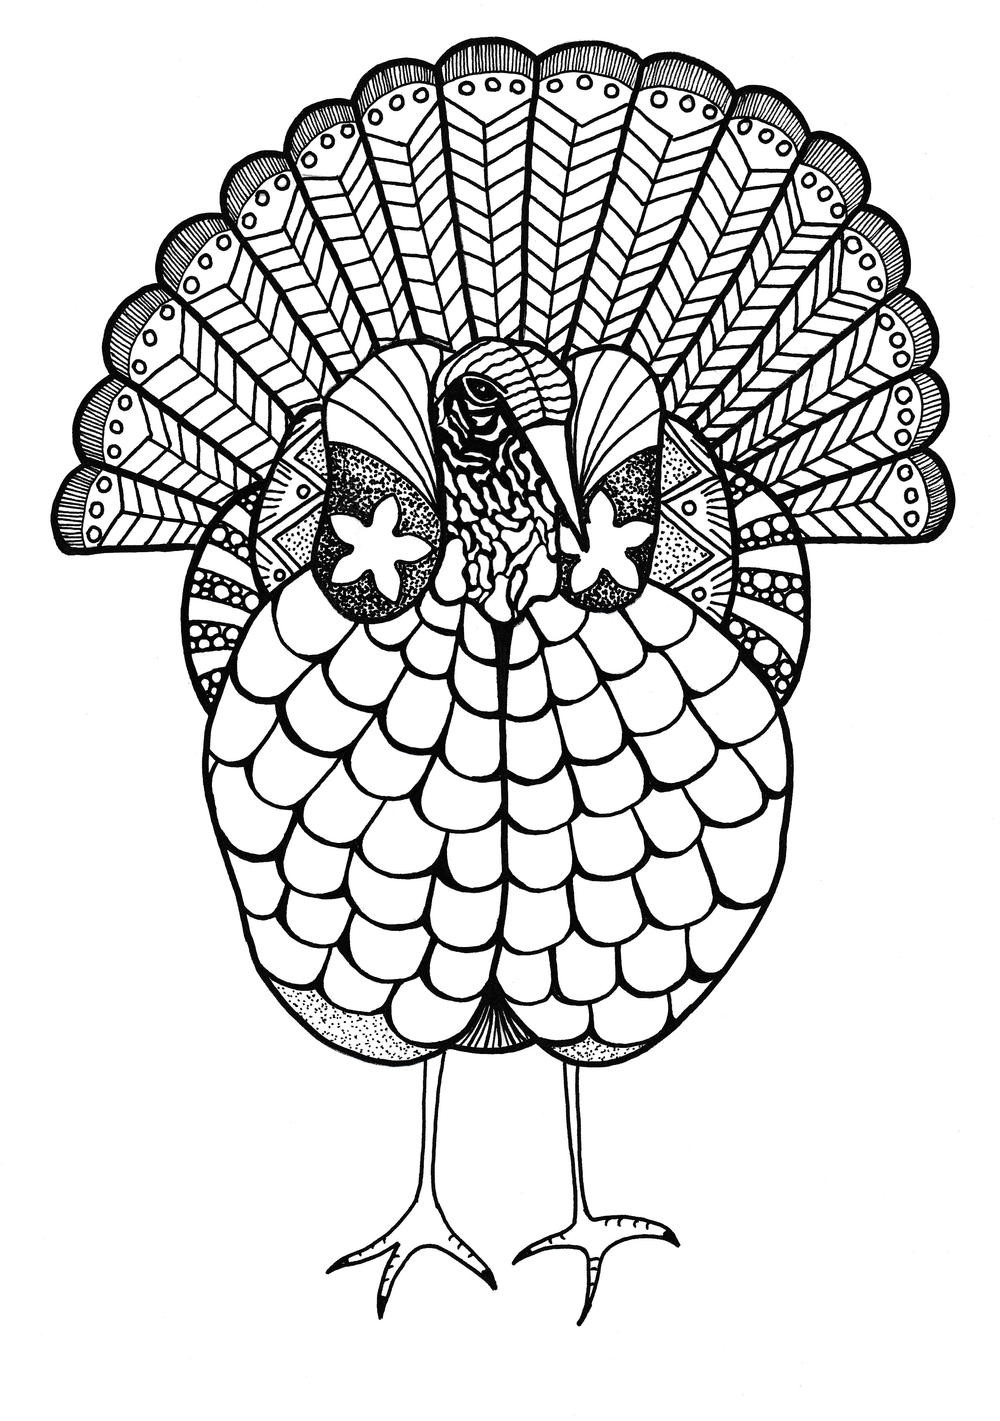 Coloring Pages Adult
 Colorful Turkey Adult Coloring Page